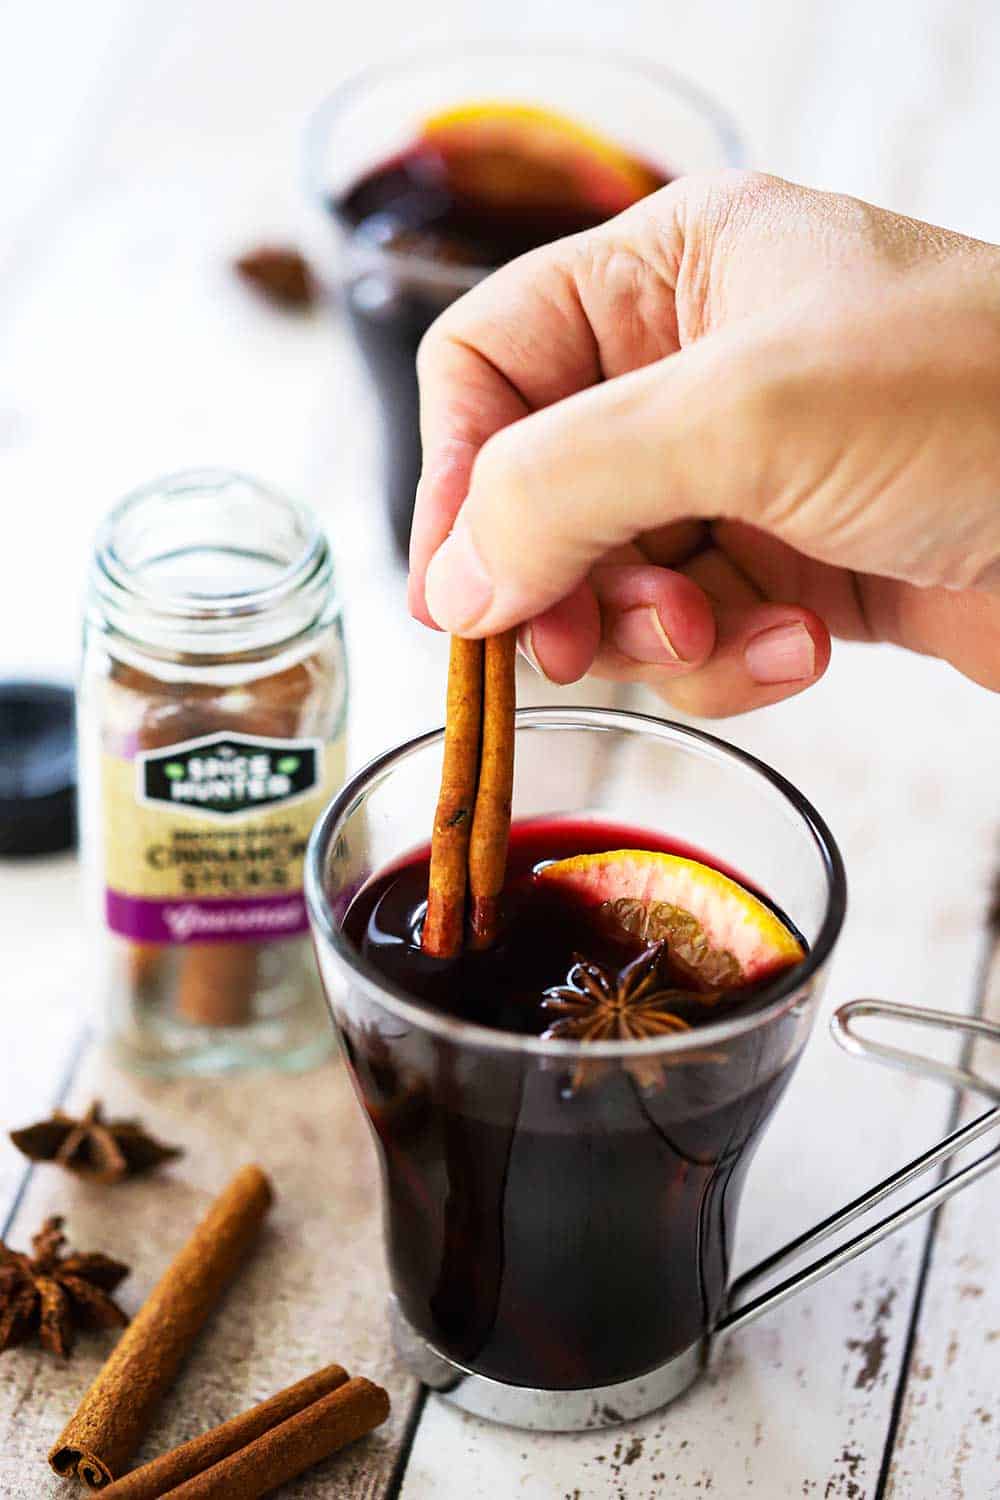 A hand placing a cinnamon stick into a clear glass filled with mulled wine.